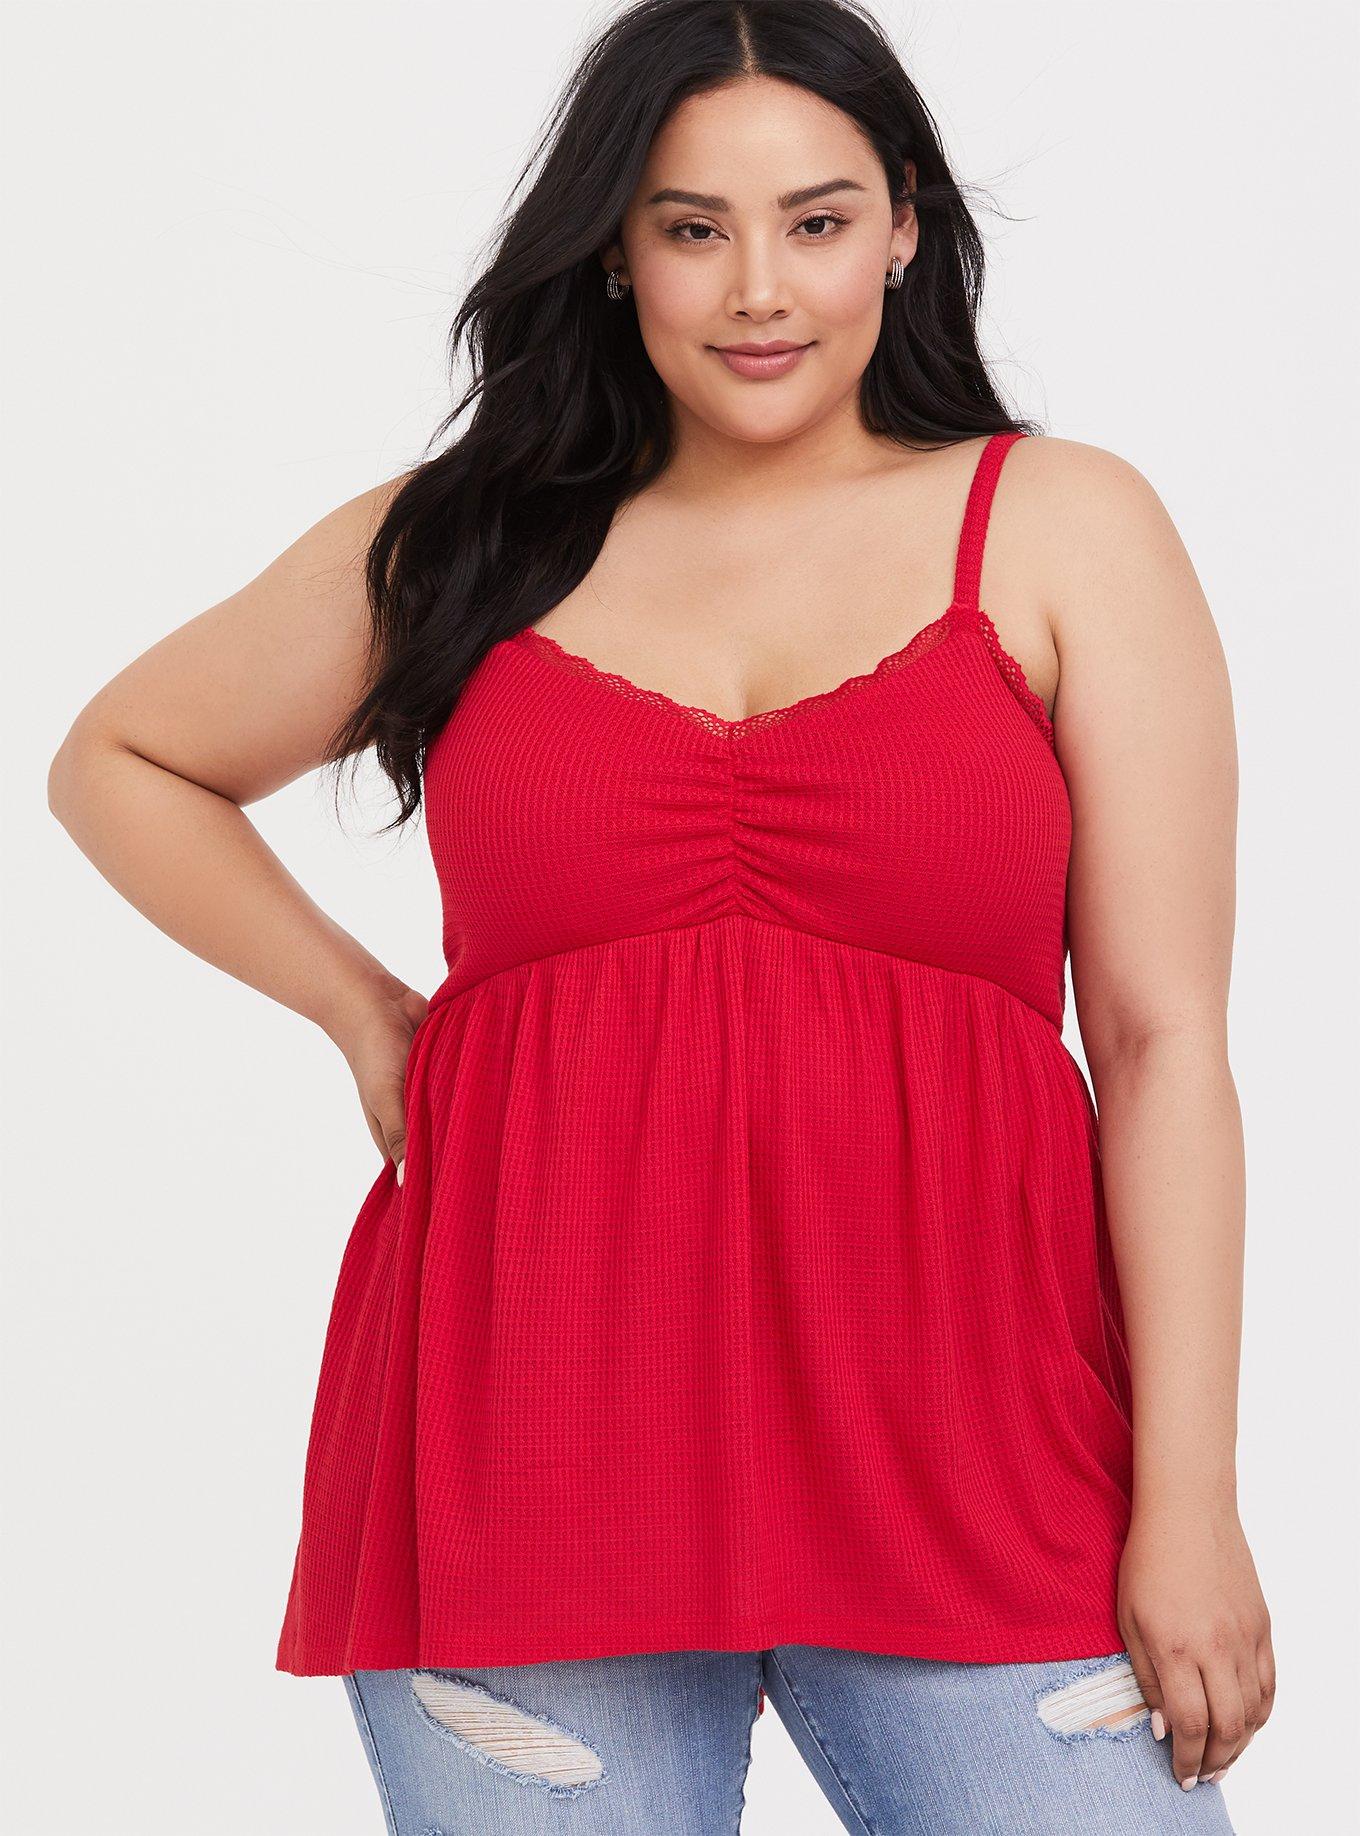 Plus Size - Red Waffle Knit Babydoll Cami - Torrid